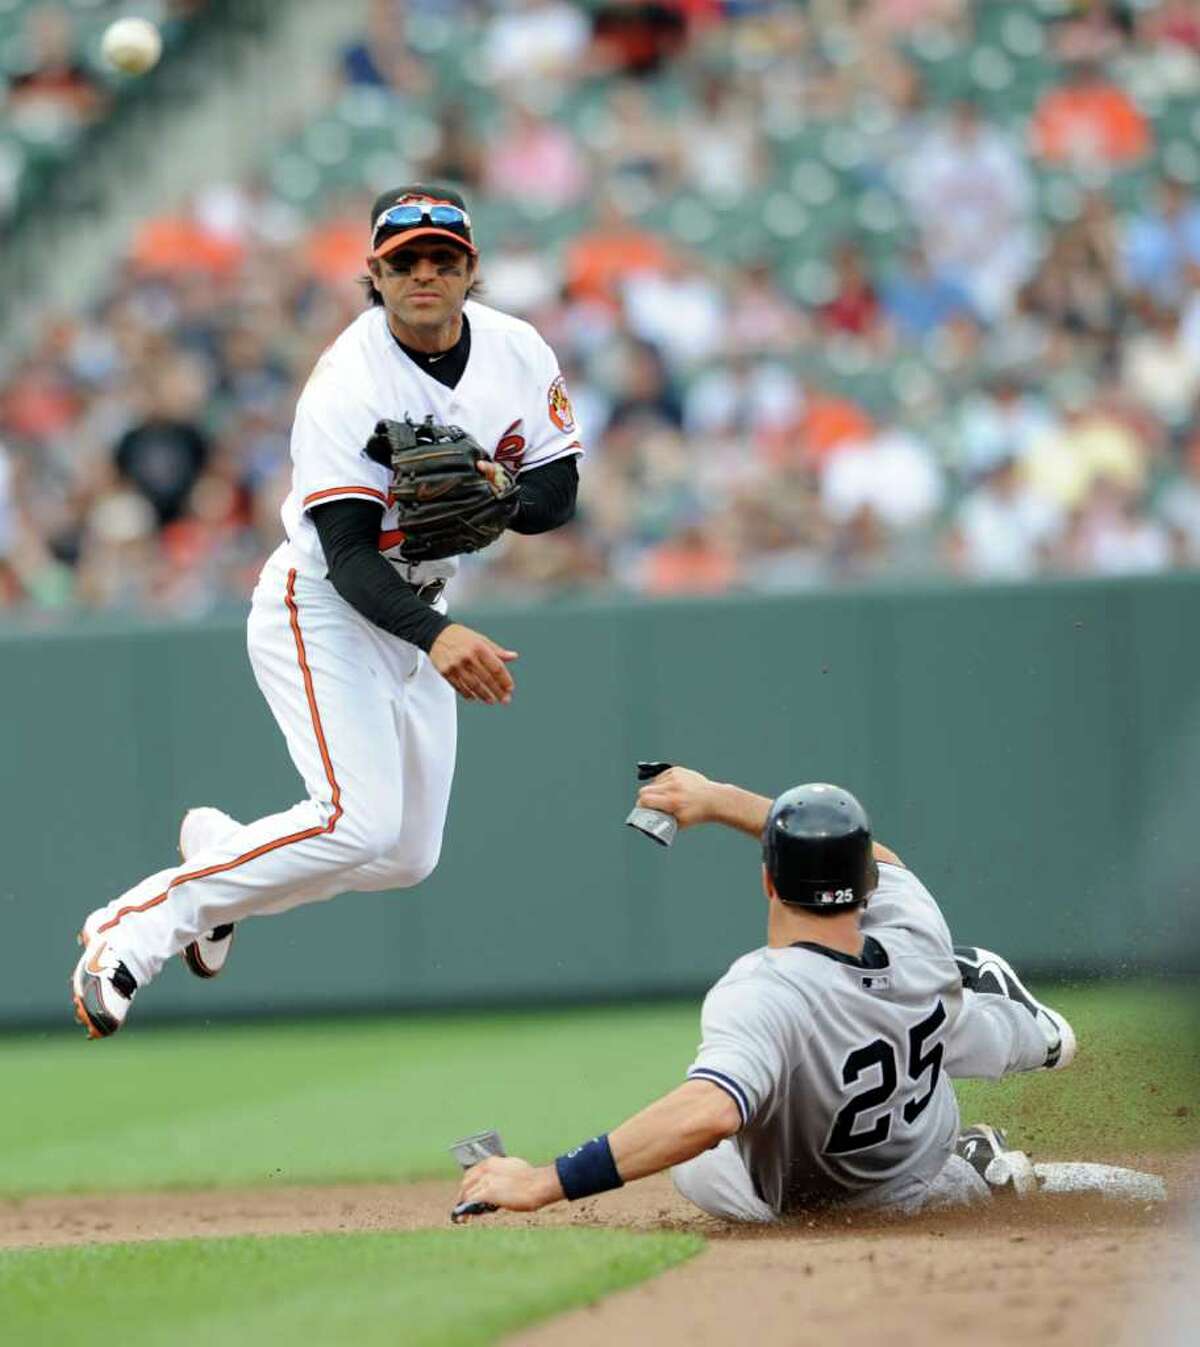 Baltimore Orioles second baseman Brian Roberts throws to first as New York Yankees' Mark Teixeira is out on a ground ball hit by Alex Rodriguez during the fifth inning of a baseball game, Sunday, April 24, 2011, in Baltimore. Rodriguez was safe at first. (AP Photo/Gail Burton)